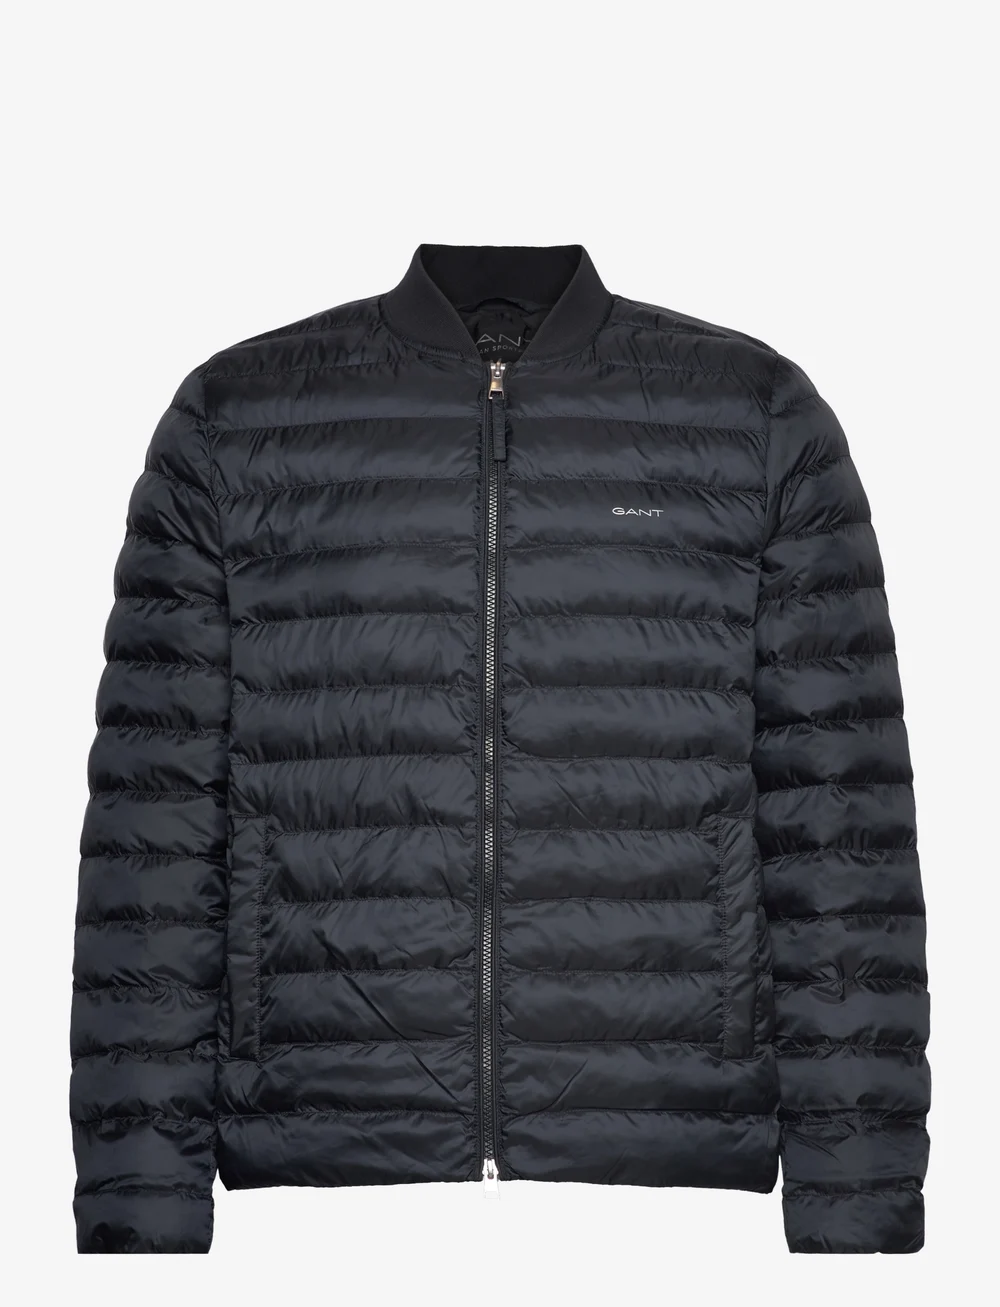 GANT Light Padded Bomber Jacket - 130 €. Buy Padded jackets from GANT  online at . Fast delivery and easy returns